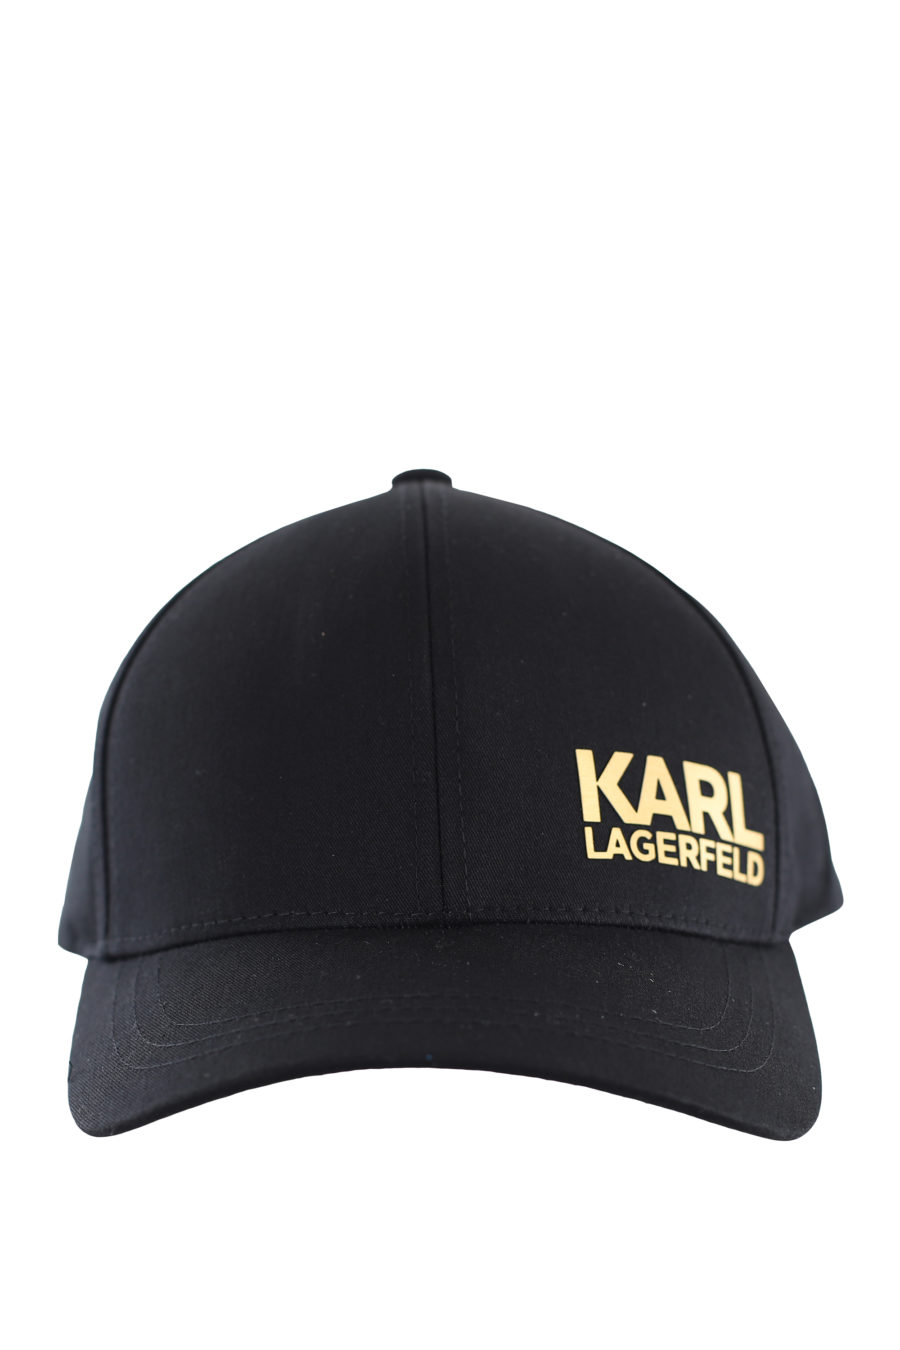 Black cap with small gold logo - IMG 1776